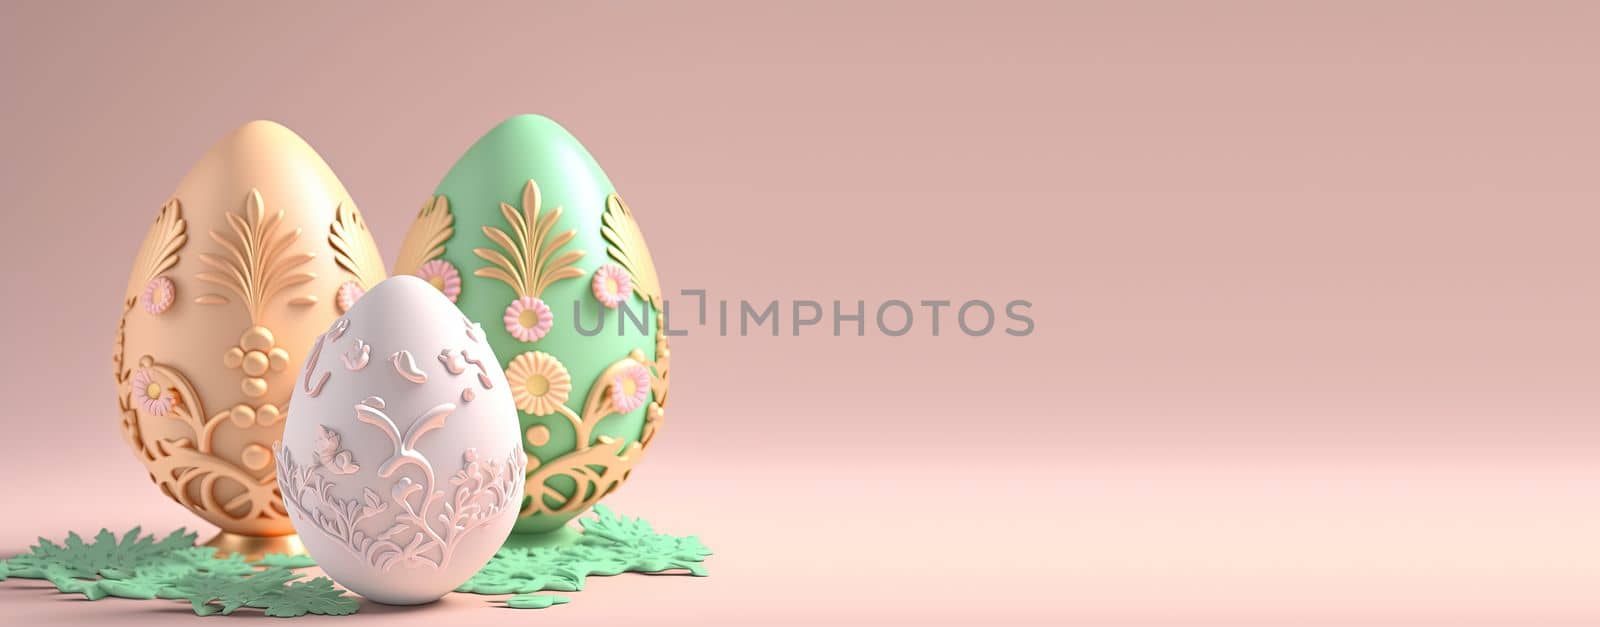 Easter day banner with decorative eggs